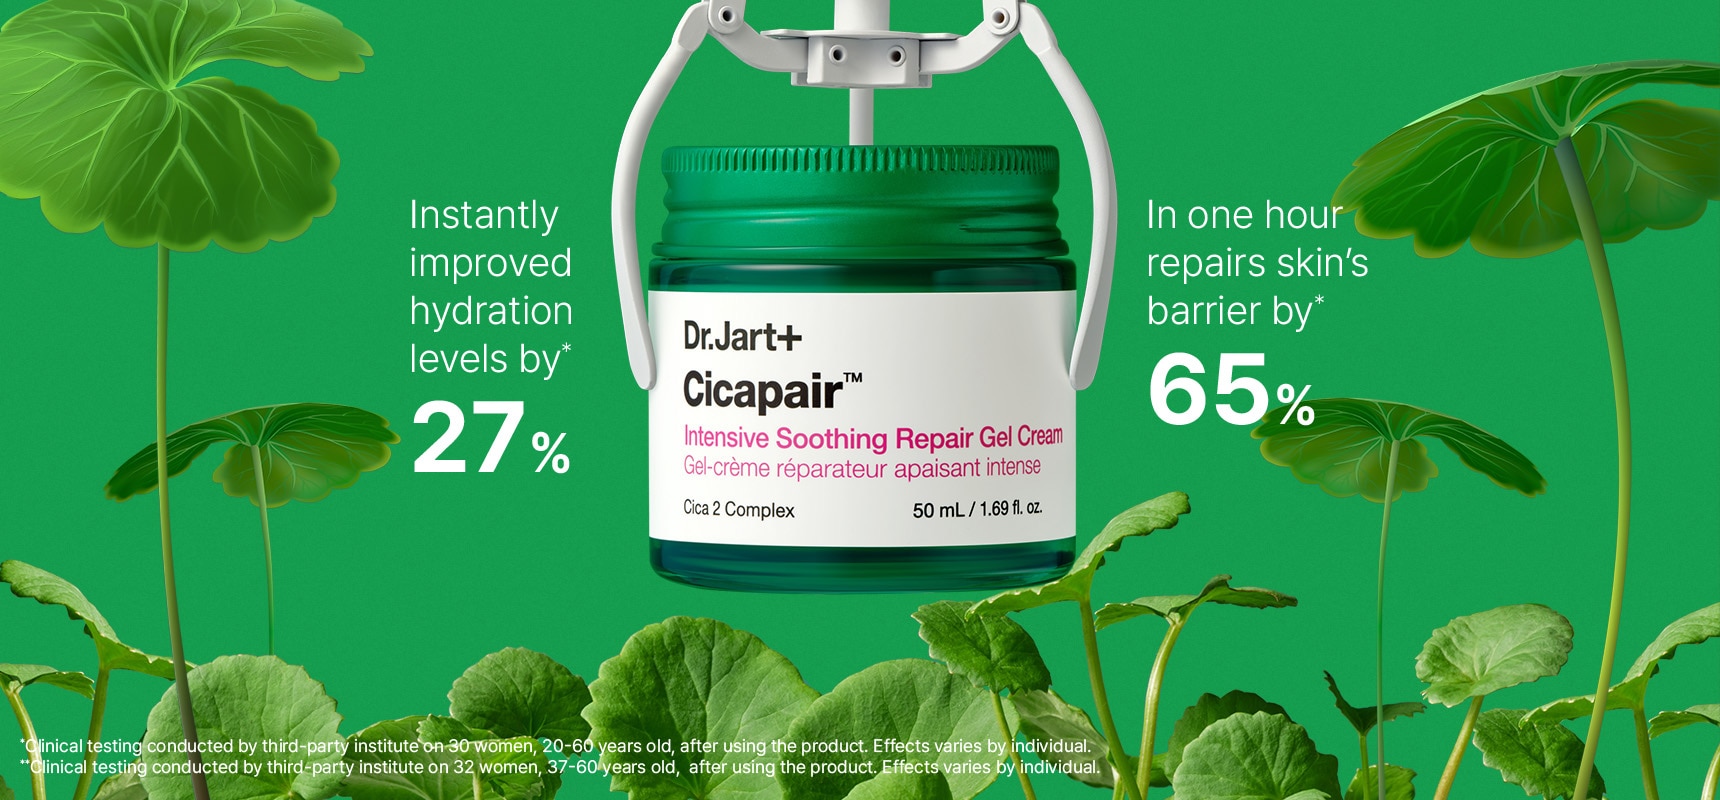 Close up of Cicapair Cooling Gel Cream. Improves hydration levels by 27%. In one hour, repairs skin's barrier by 65%.